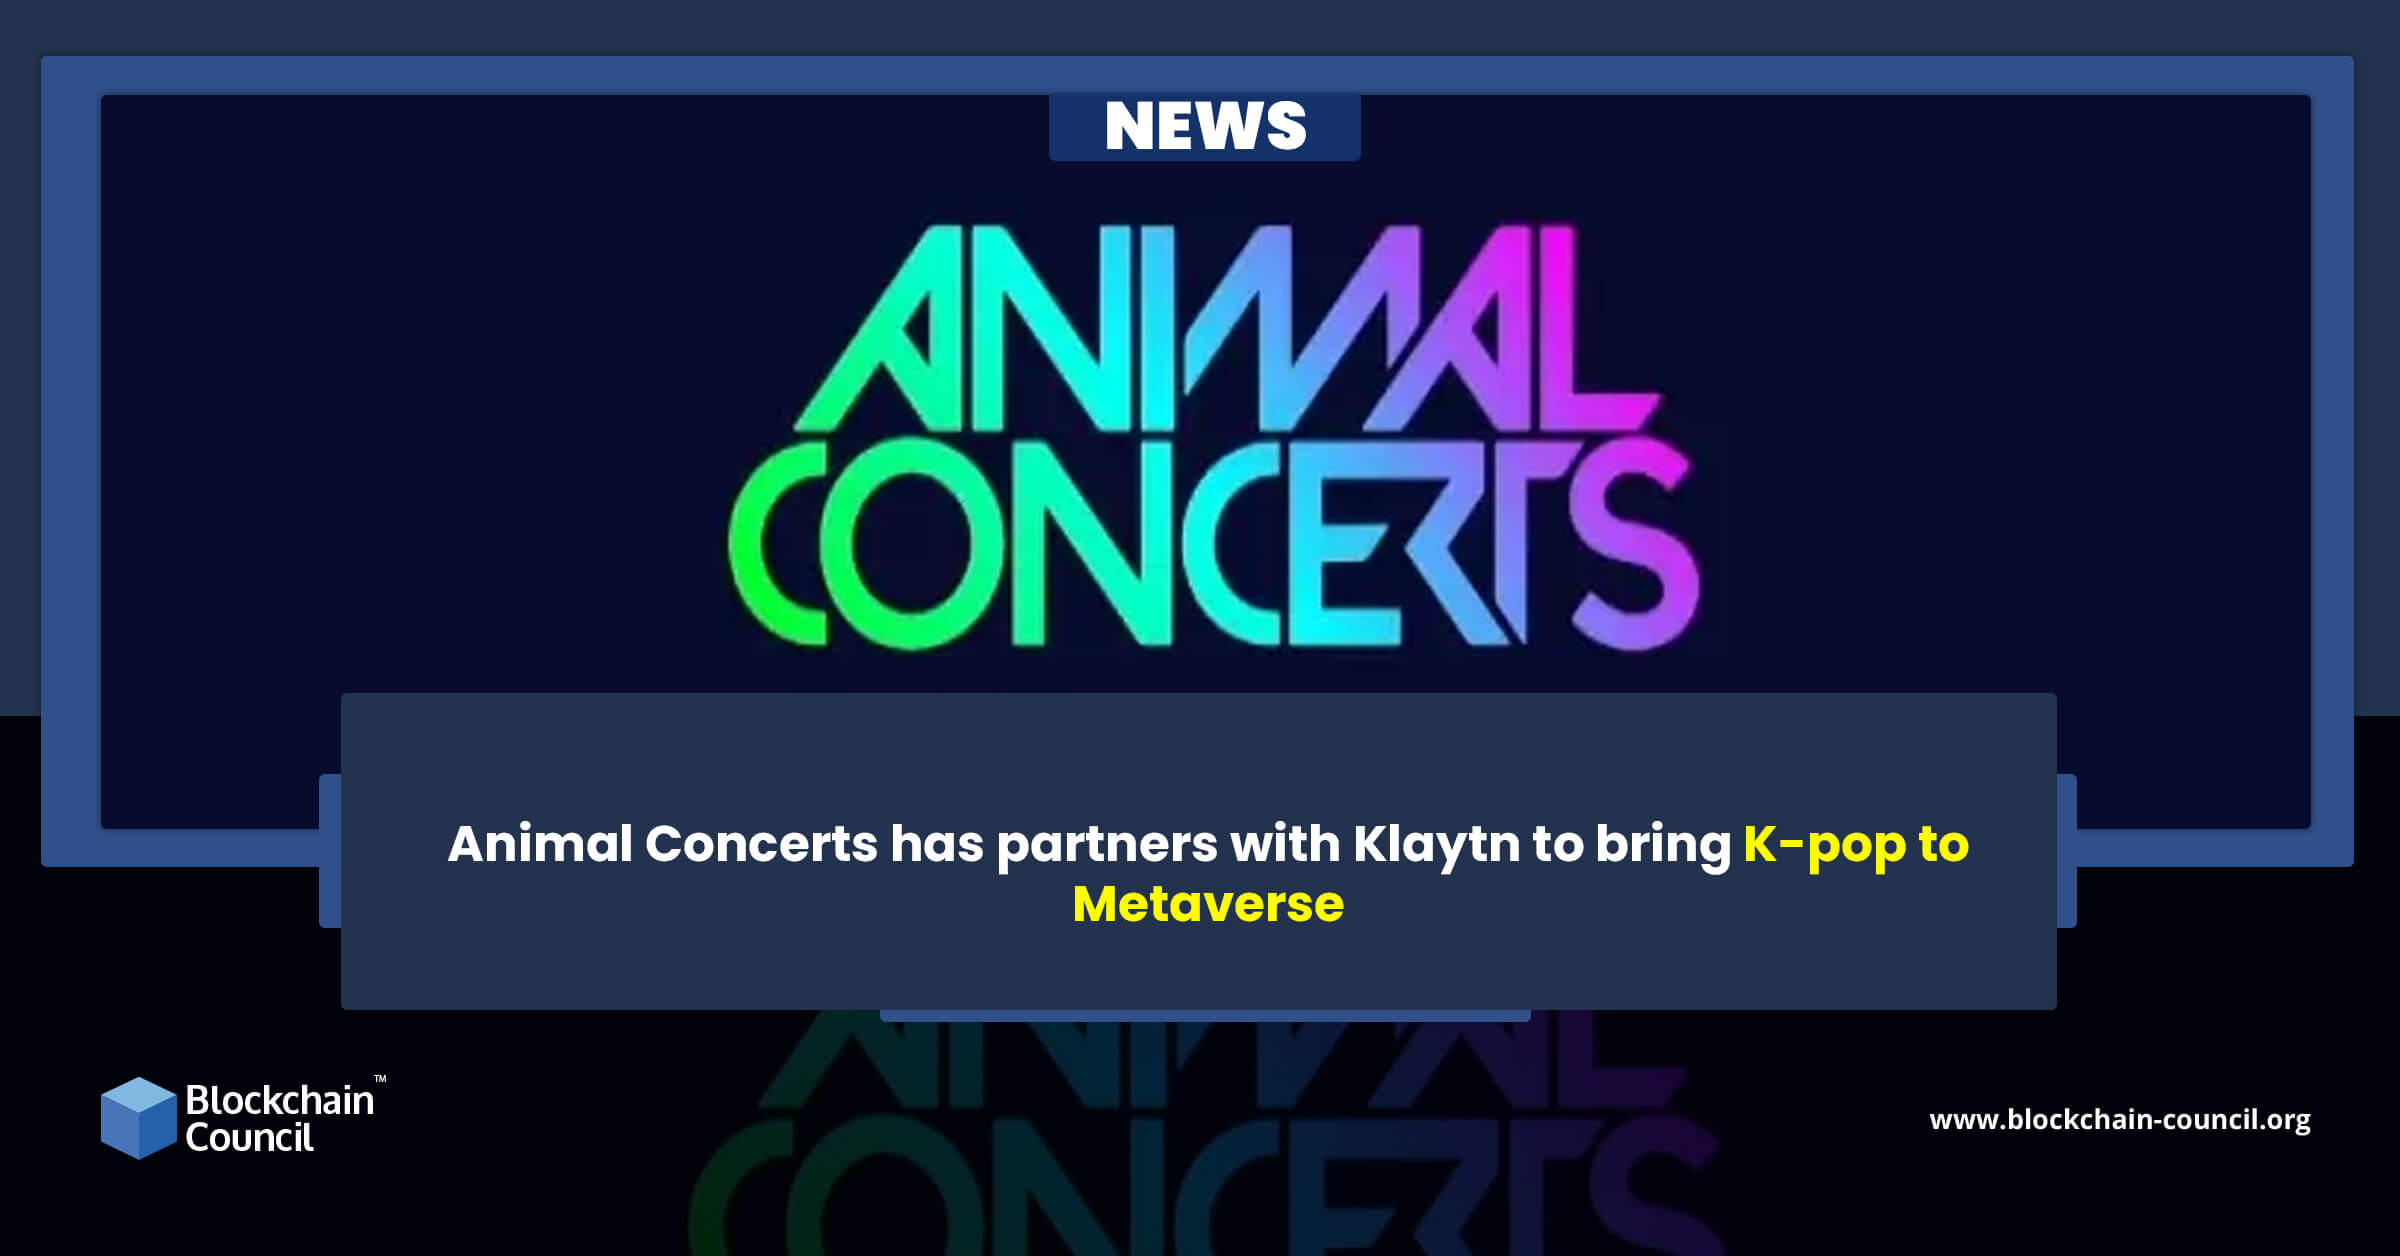 Animal Concerts has partners with Klaytn to bring K-pop to Metaverse